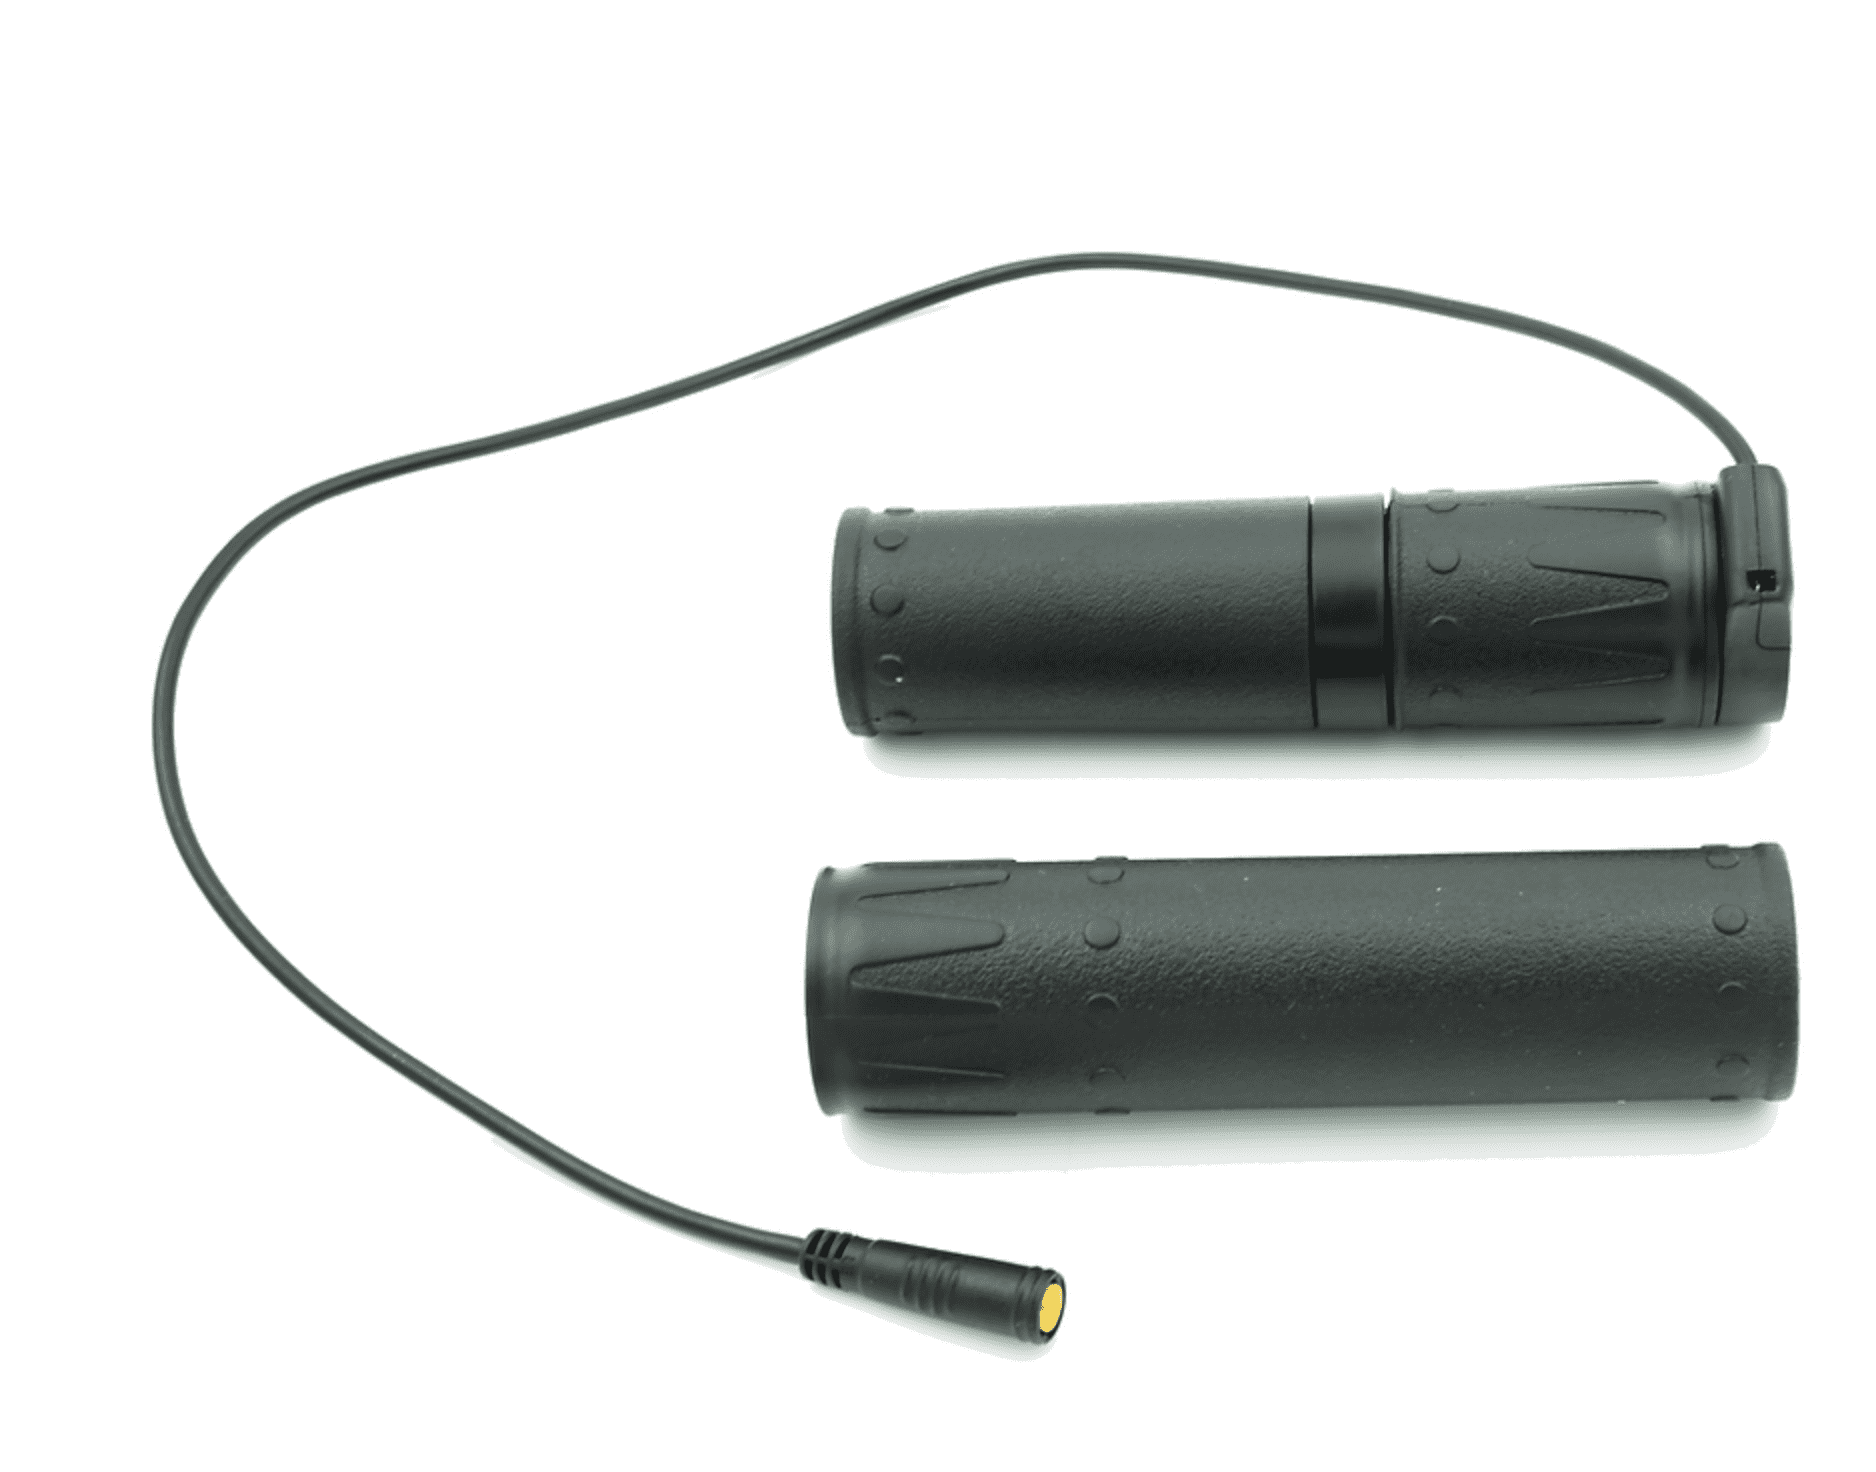 A pair of black jump ropes on top of a white surface.